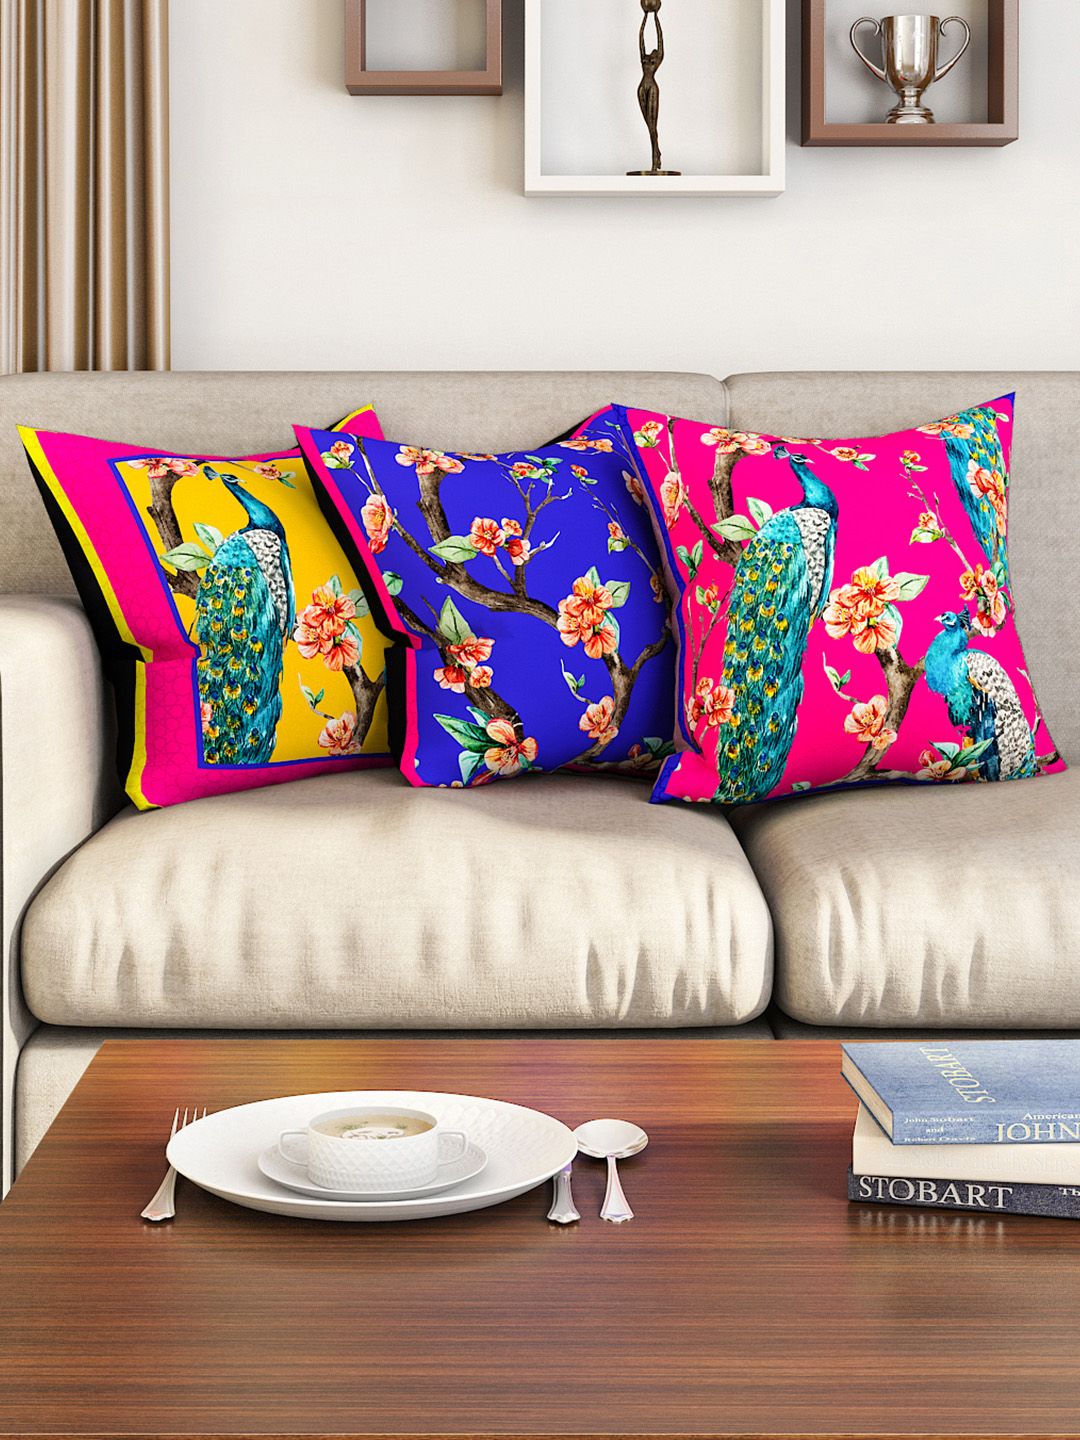 SEJ by Nisha Gupta Set of 3 Ethnic Motifs Square Cushion Covers Price in India